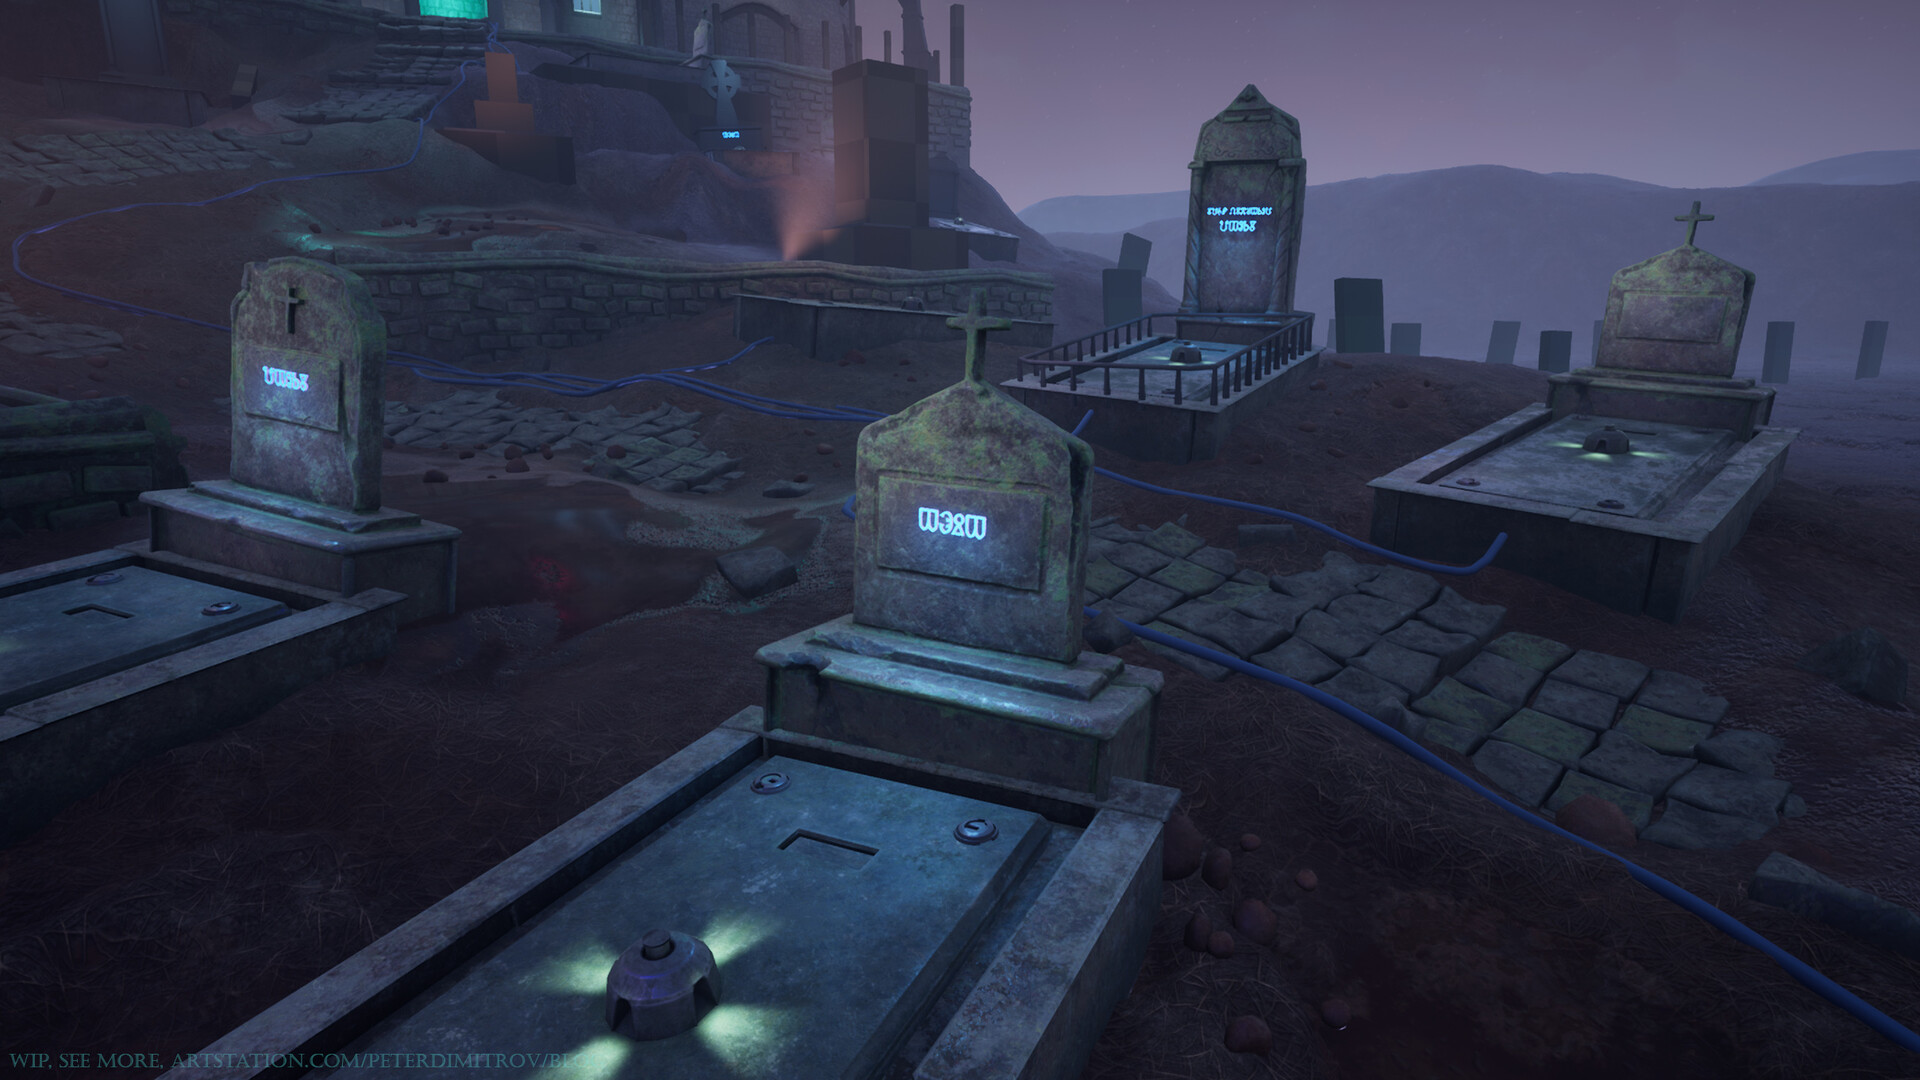 Close up view of some of the gravestones with the caskets this time around sunk in and closed (the server devices not visible).